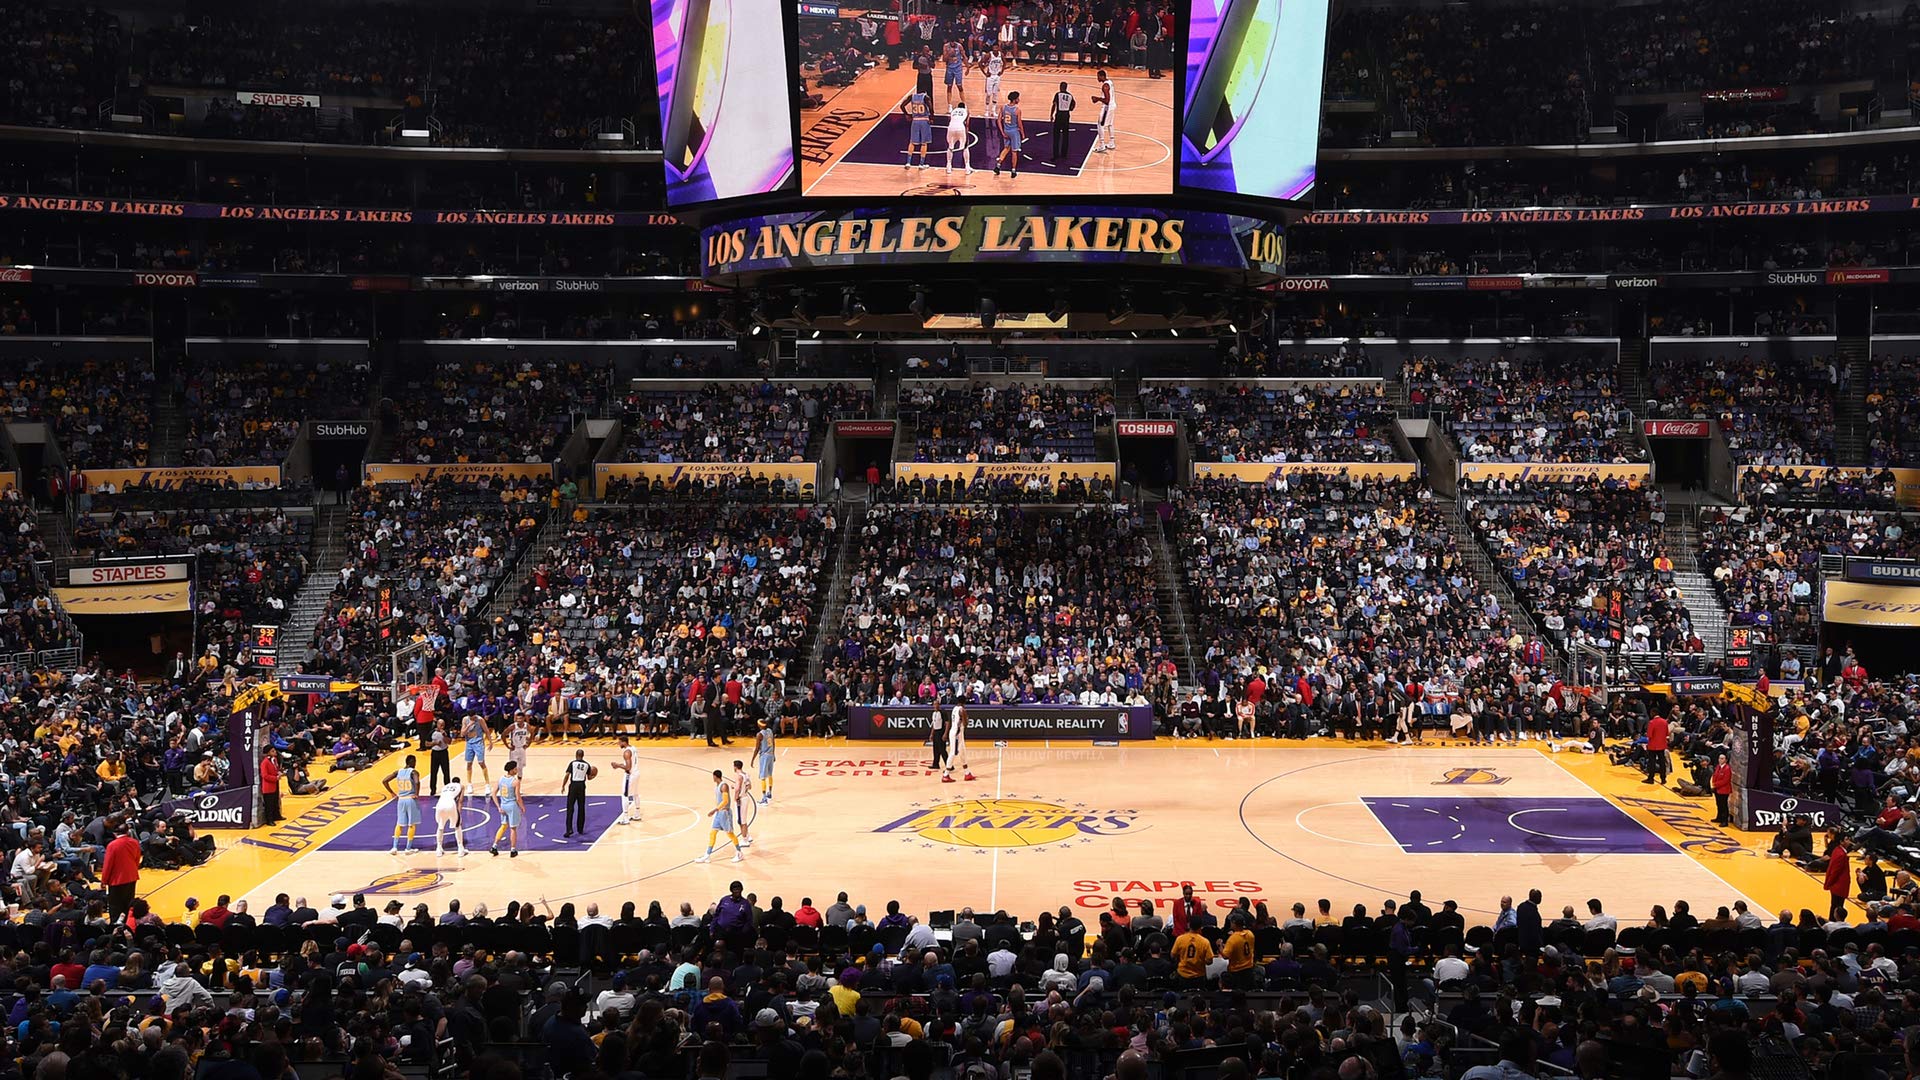 Los Angeles Clippers Vs Los Angeles Lakers Live - HD Wallpaper 